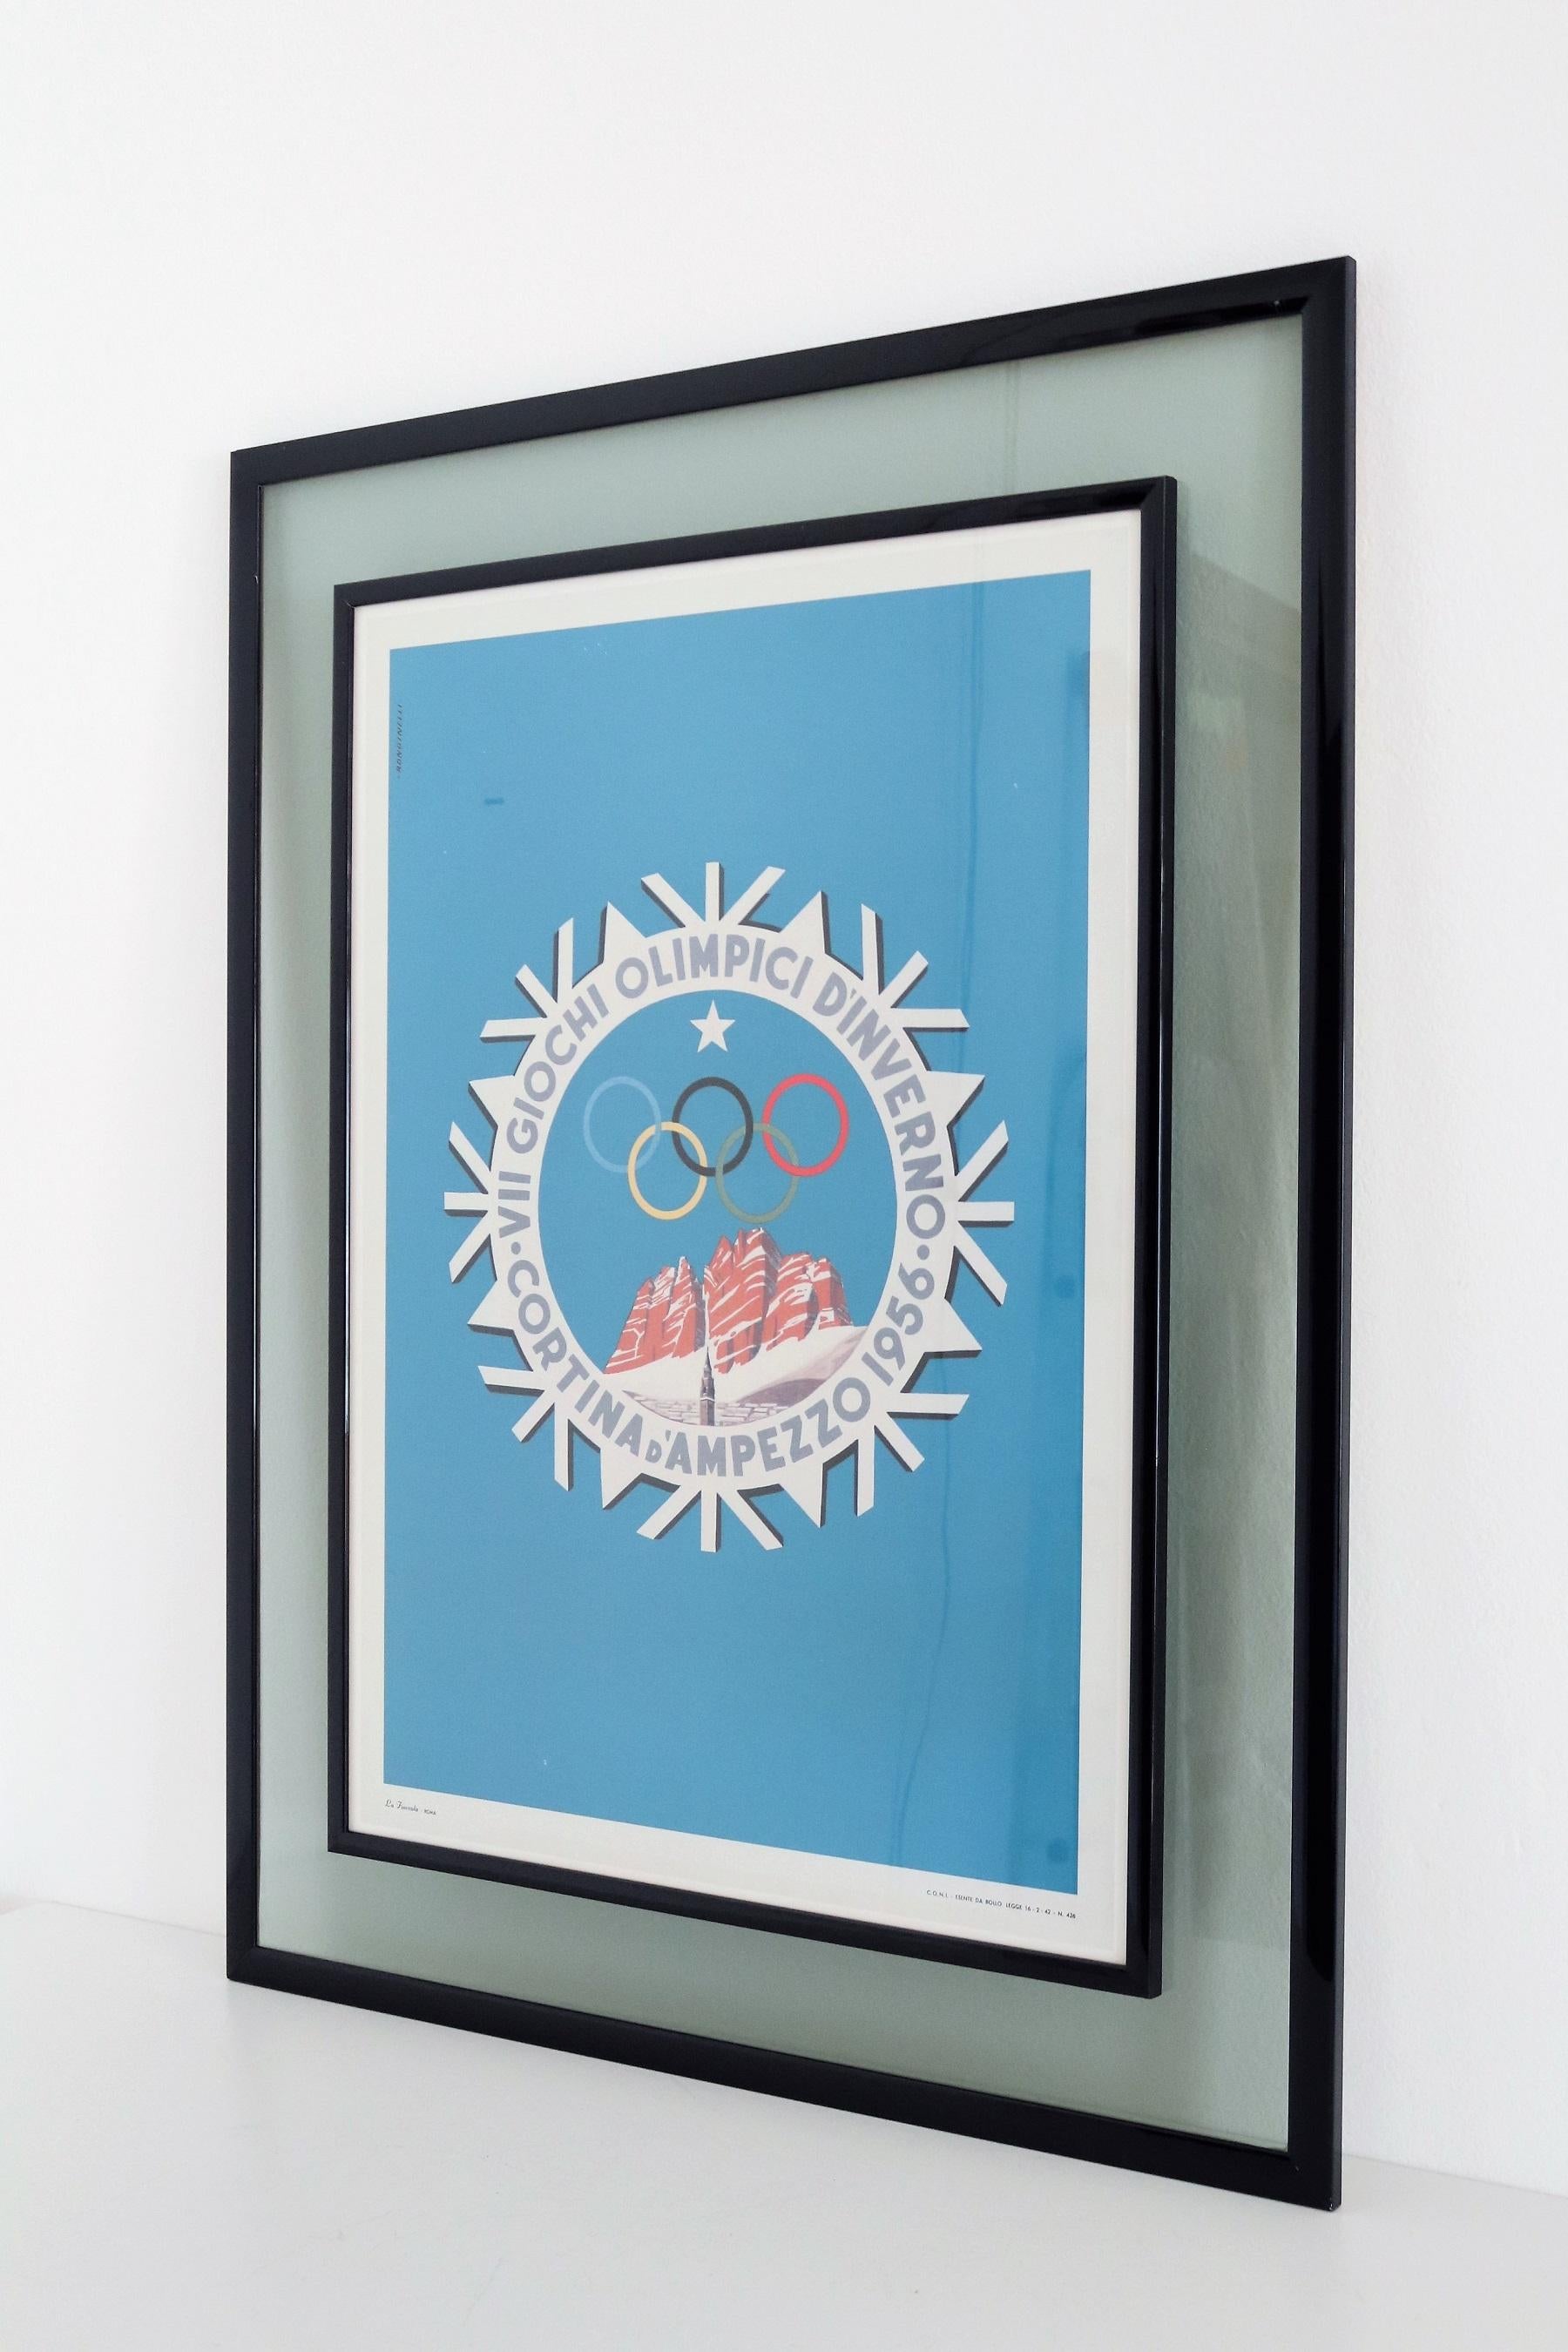 Beautiful wall art of a vintage poster designed by Rondinelli for the winter Olympic Games in Cortina d'Ampezzo, Italy, in 1956.
The poster is in very good condition and comes with its original wood and double glass frame in blue color.
There are